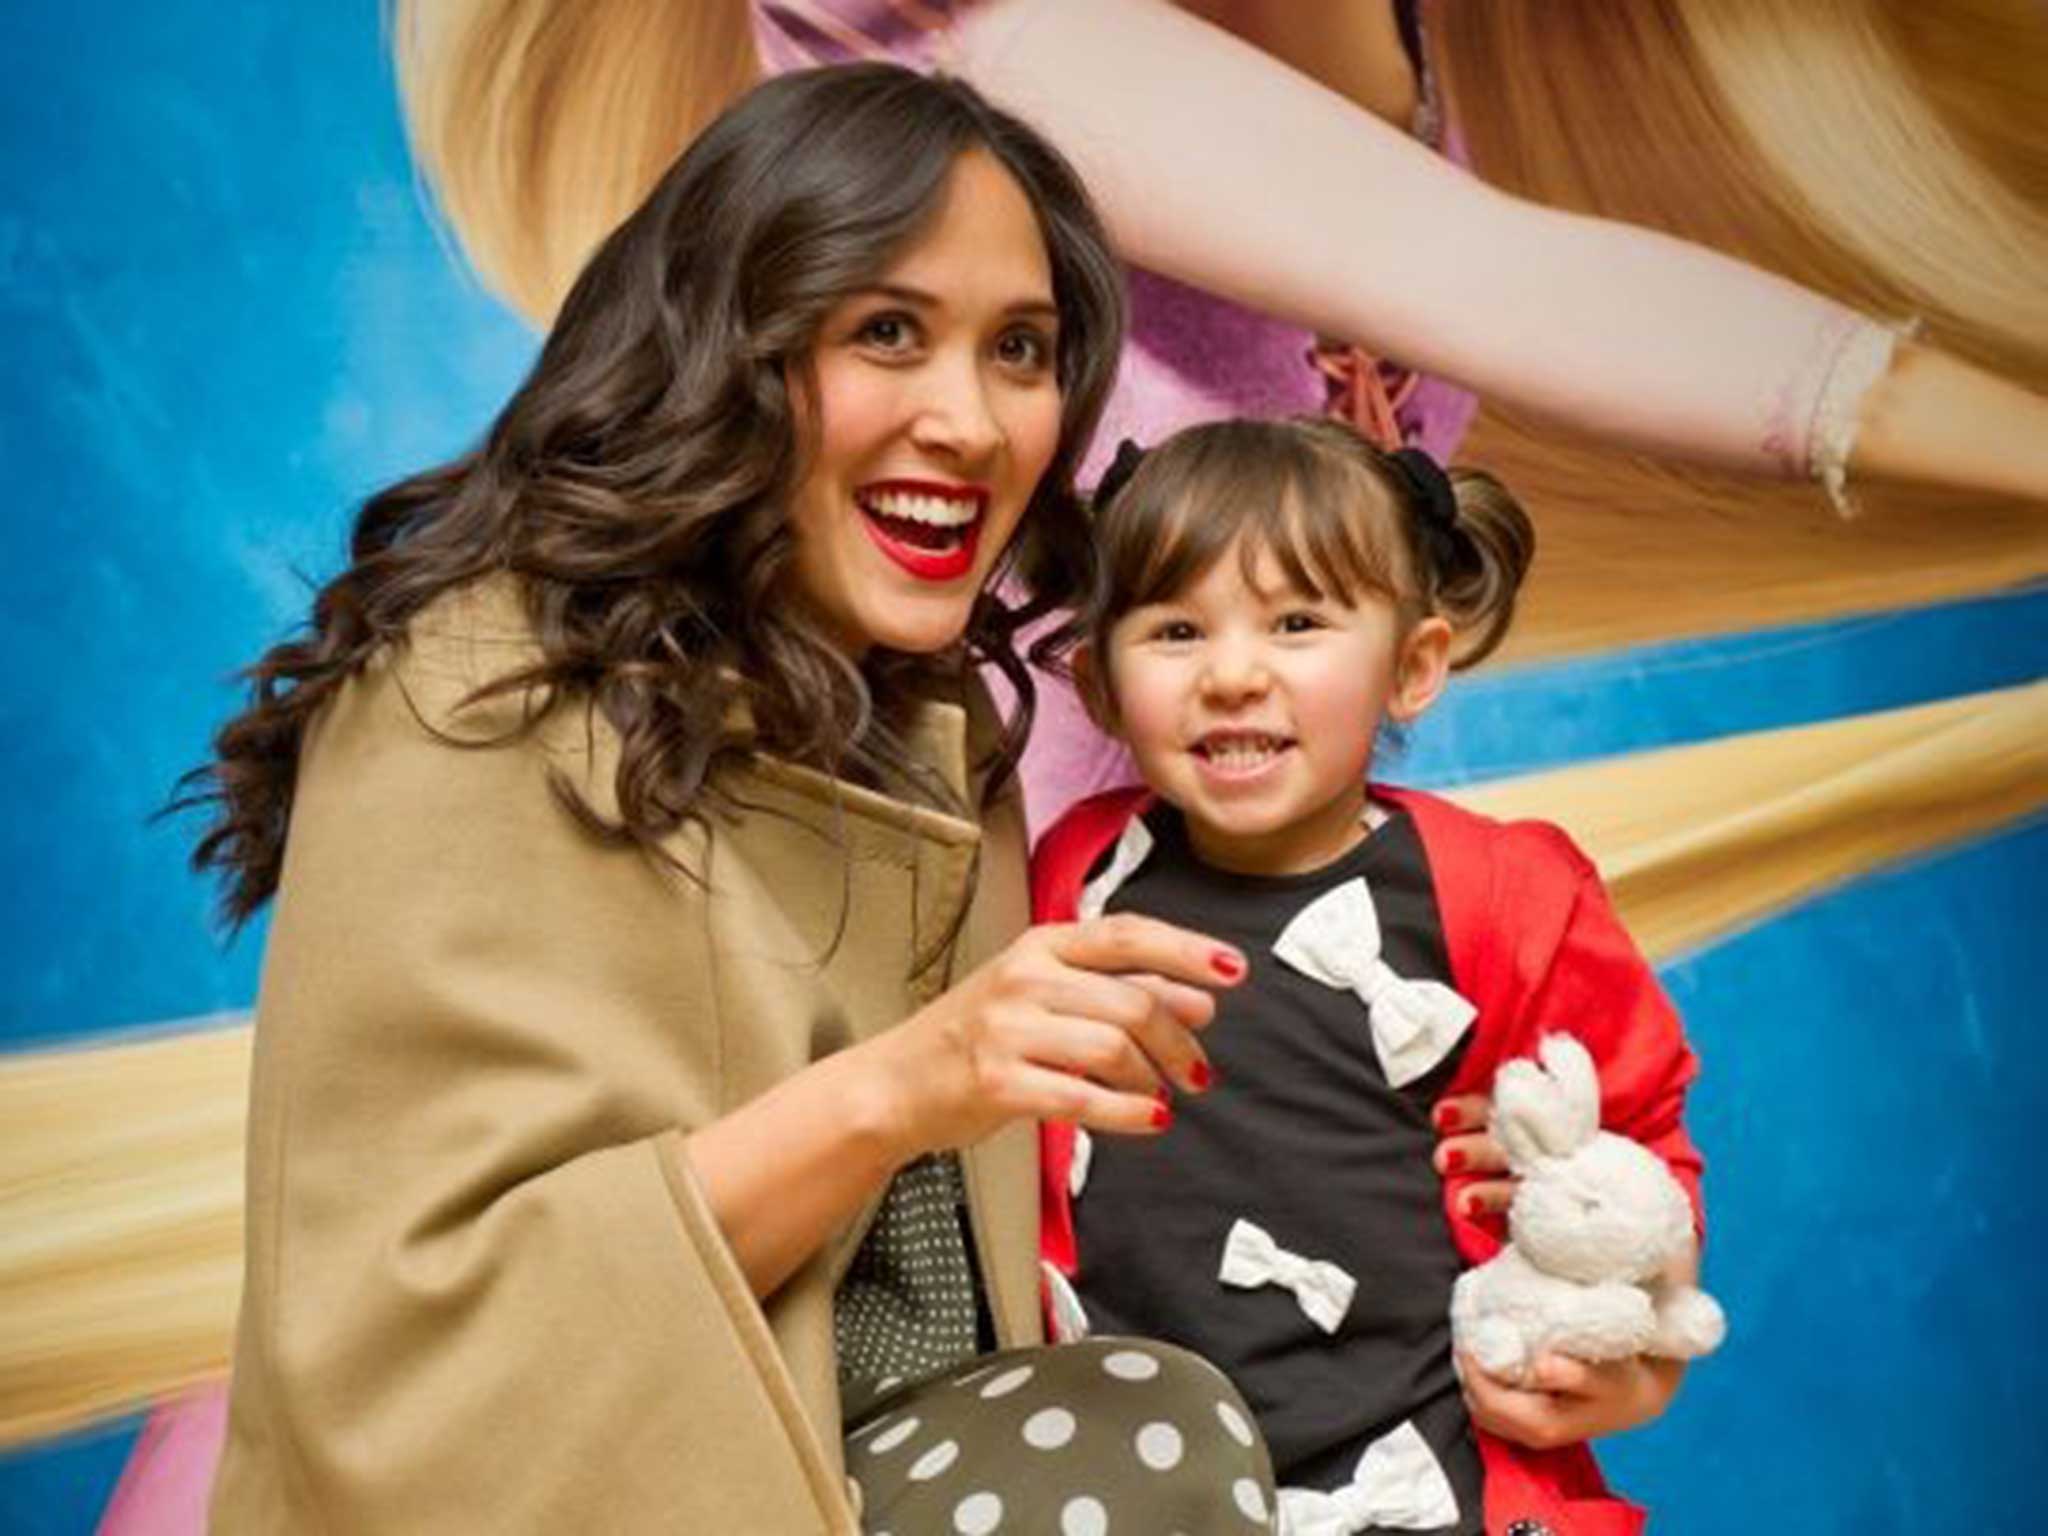 Myleen Klass and her daughter Ava attend the UK film premiere of ‘Tangled’